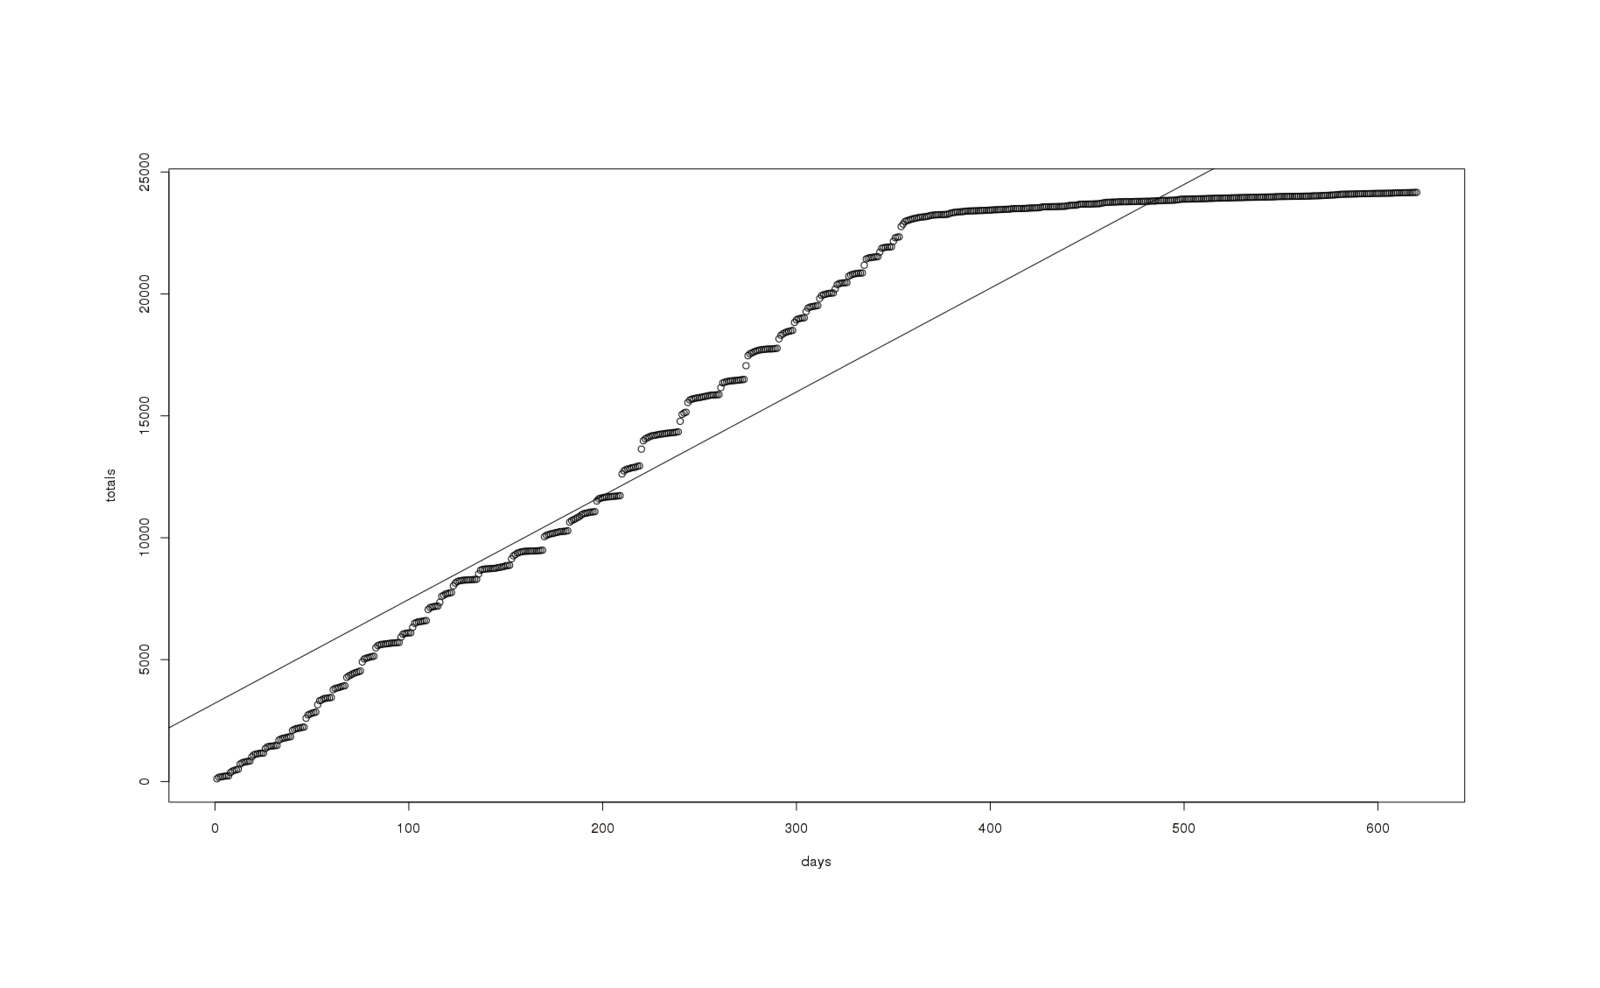 A graph of total reviews vs time with a (bad) linear fit overlaid